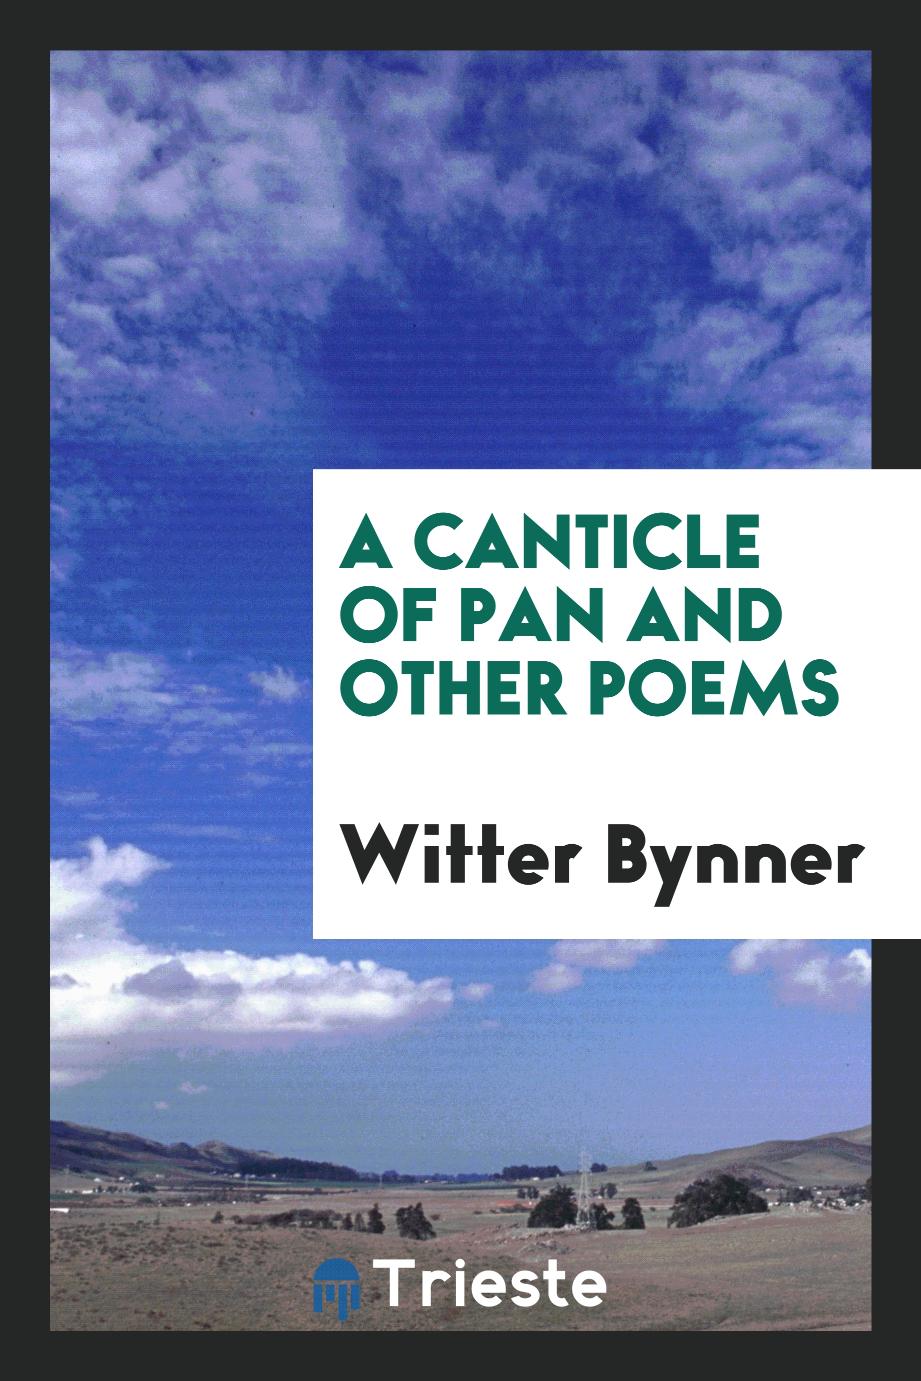 A canticle of Pan and other poems